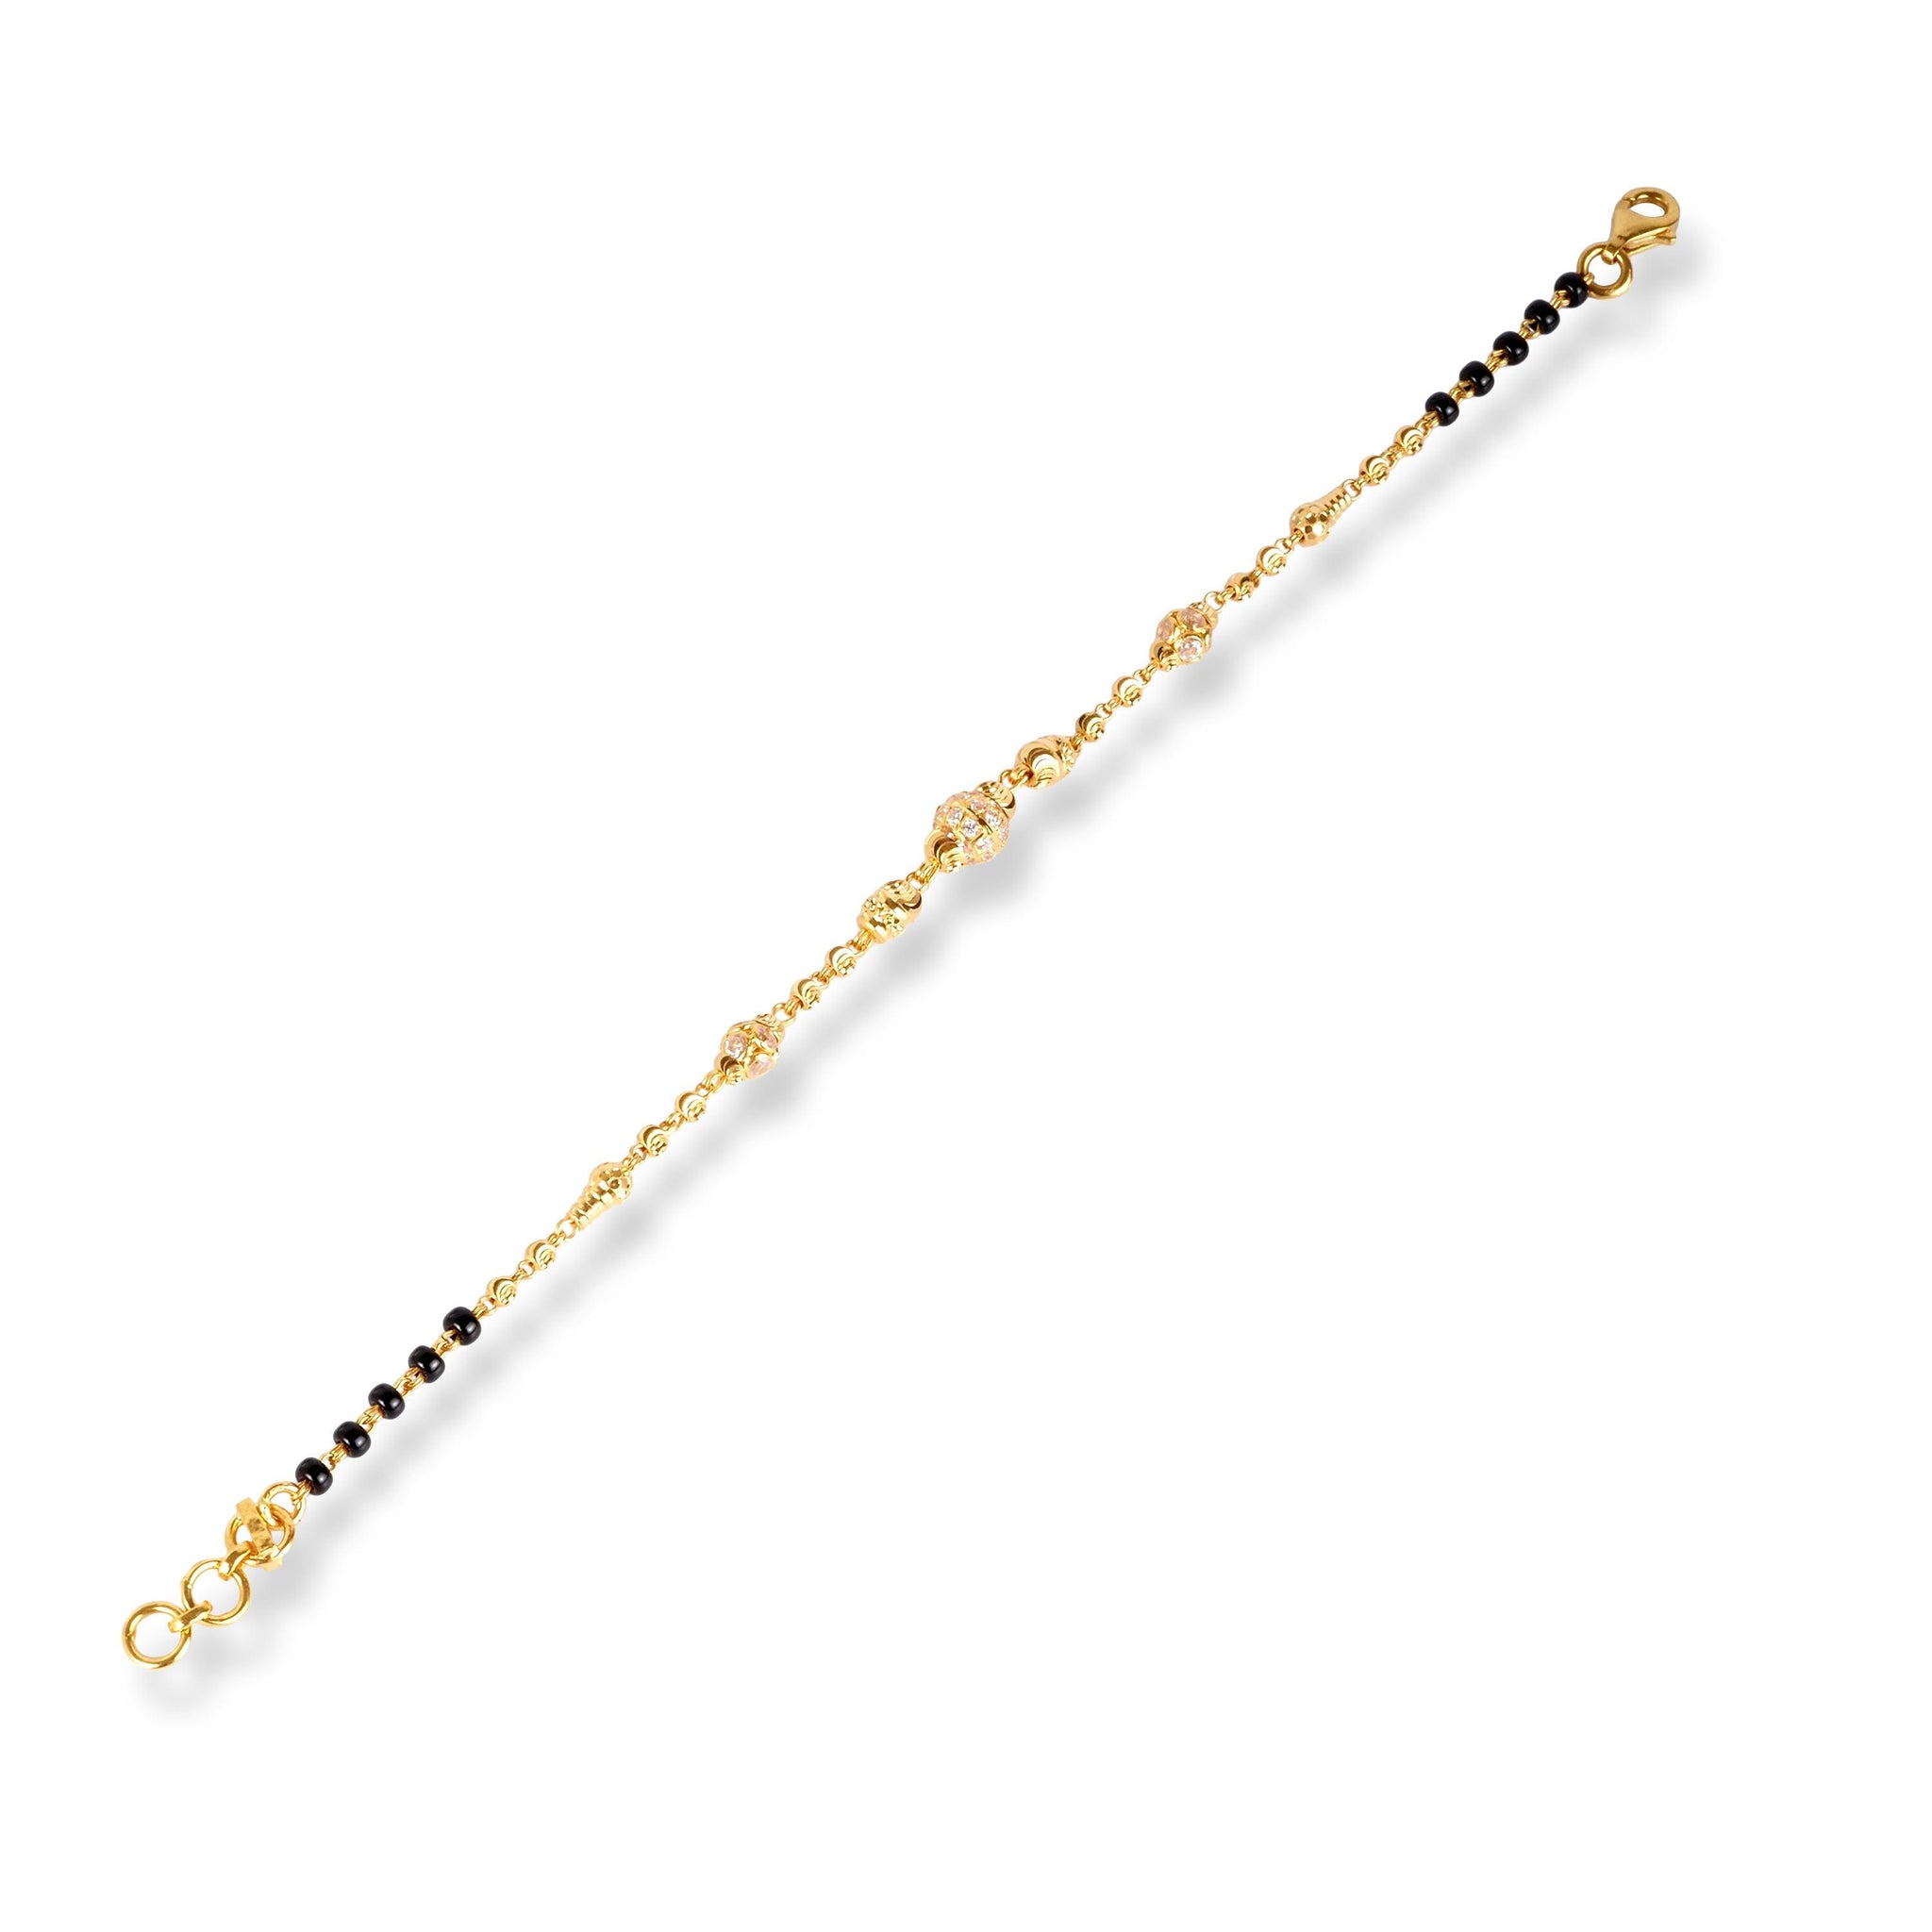 22ct Gold Bracelet with Black Beads and Cubic Zirconia Stones LBR-8482